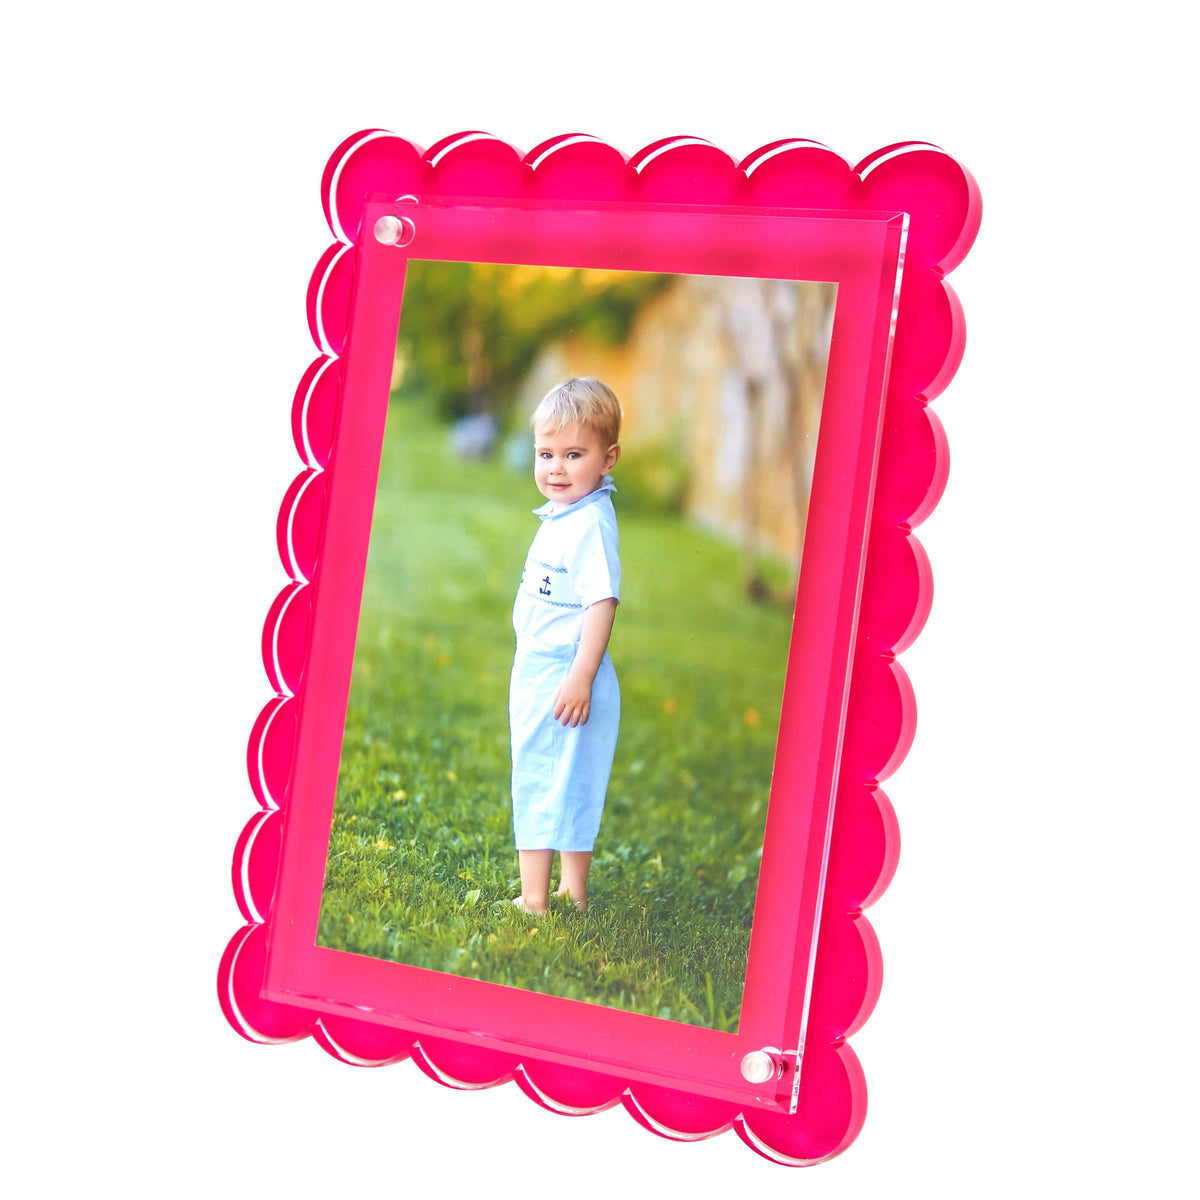 Frame SCALLOP Pink Photo Size 4 inches by 6 inches or 5 inches by 7 inches